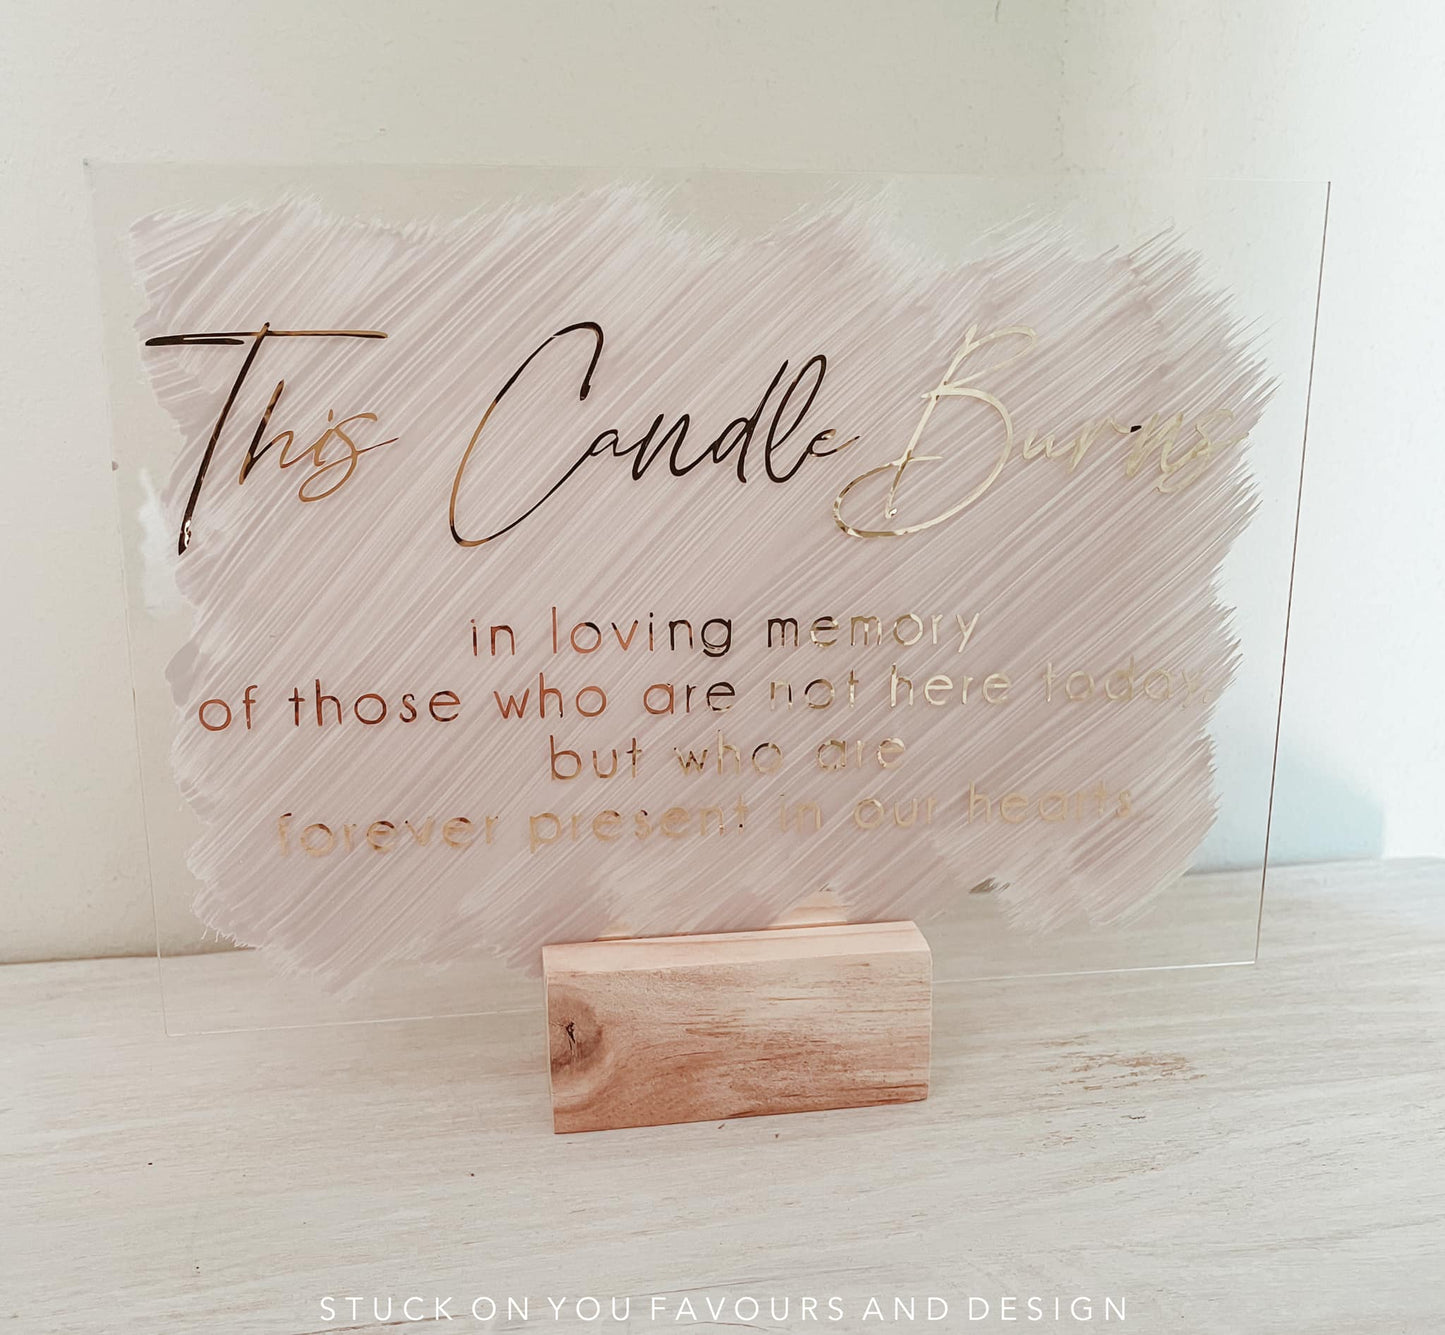 This Candle Burns in Loving Memory - A5 Acrylic Table Talker